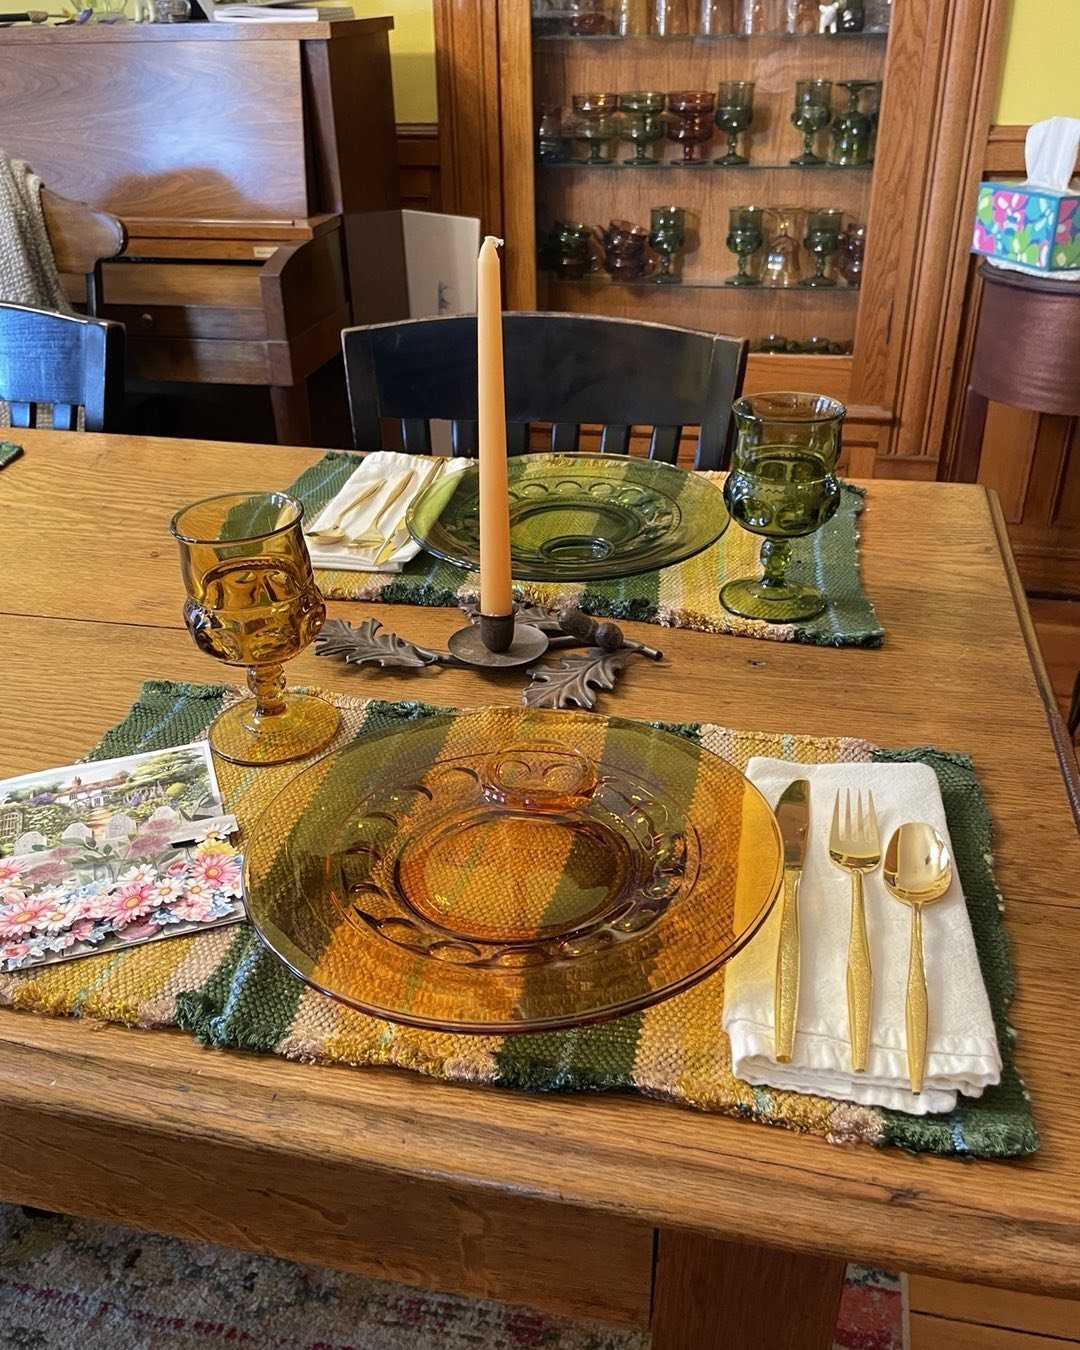 When you have a talented momma who weaves you placemats, you definitely set the table fancy!